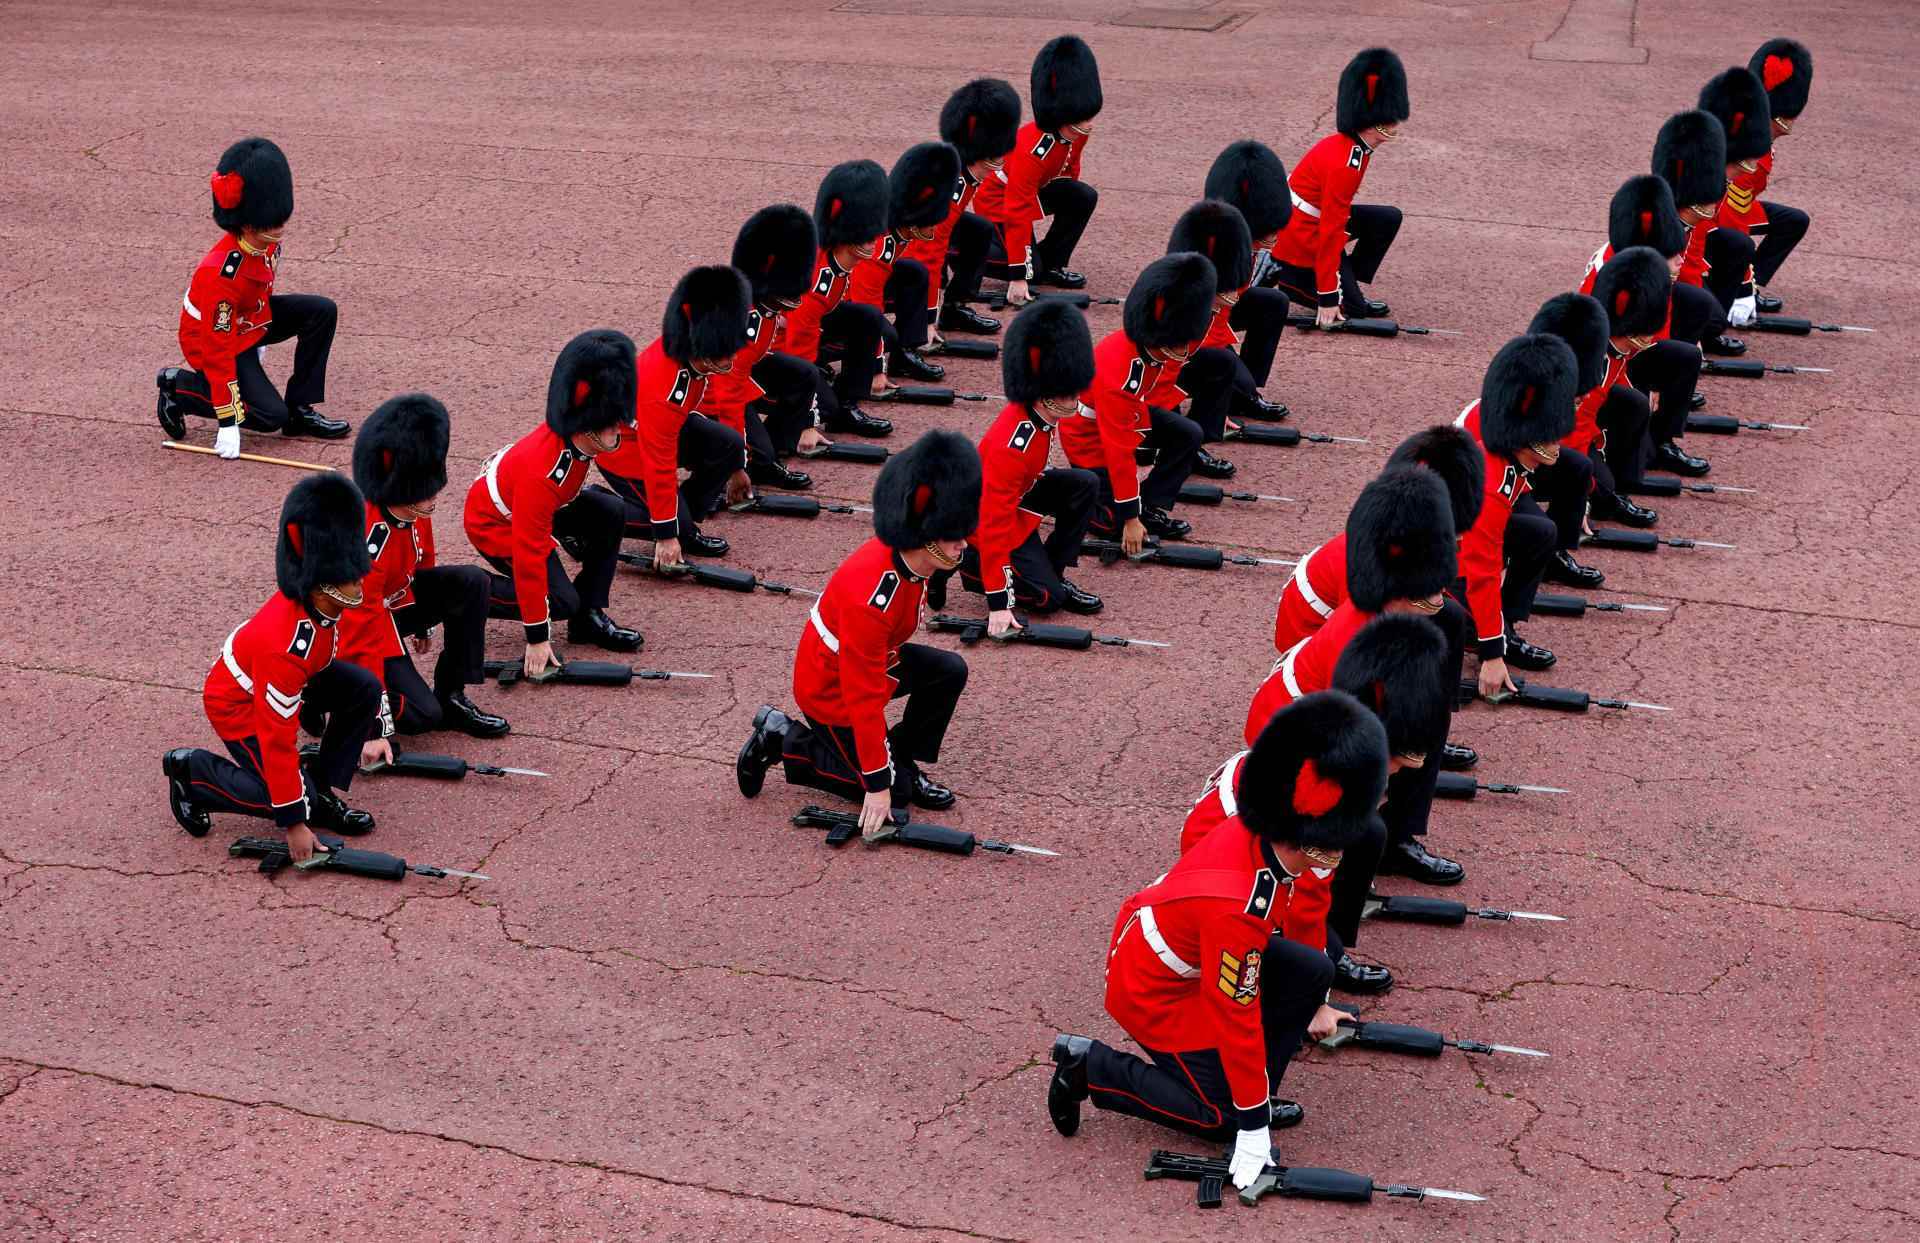 Members of the royal guard during the first reading of King Charles III's proclamation at St. James's Palace, London, September 10, 2022.